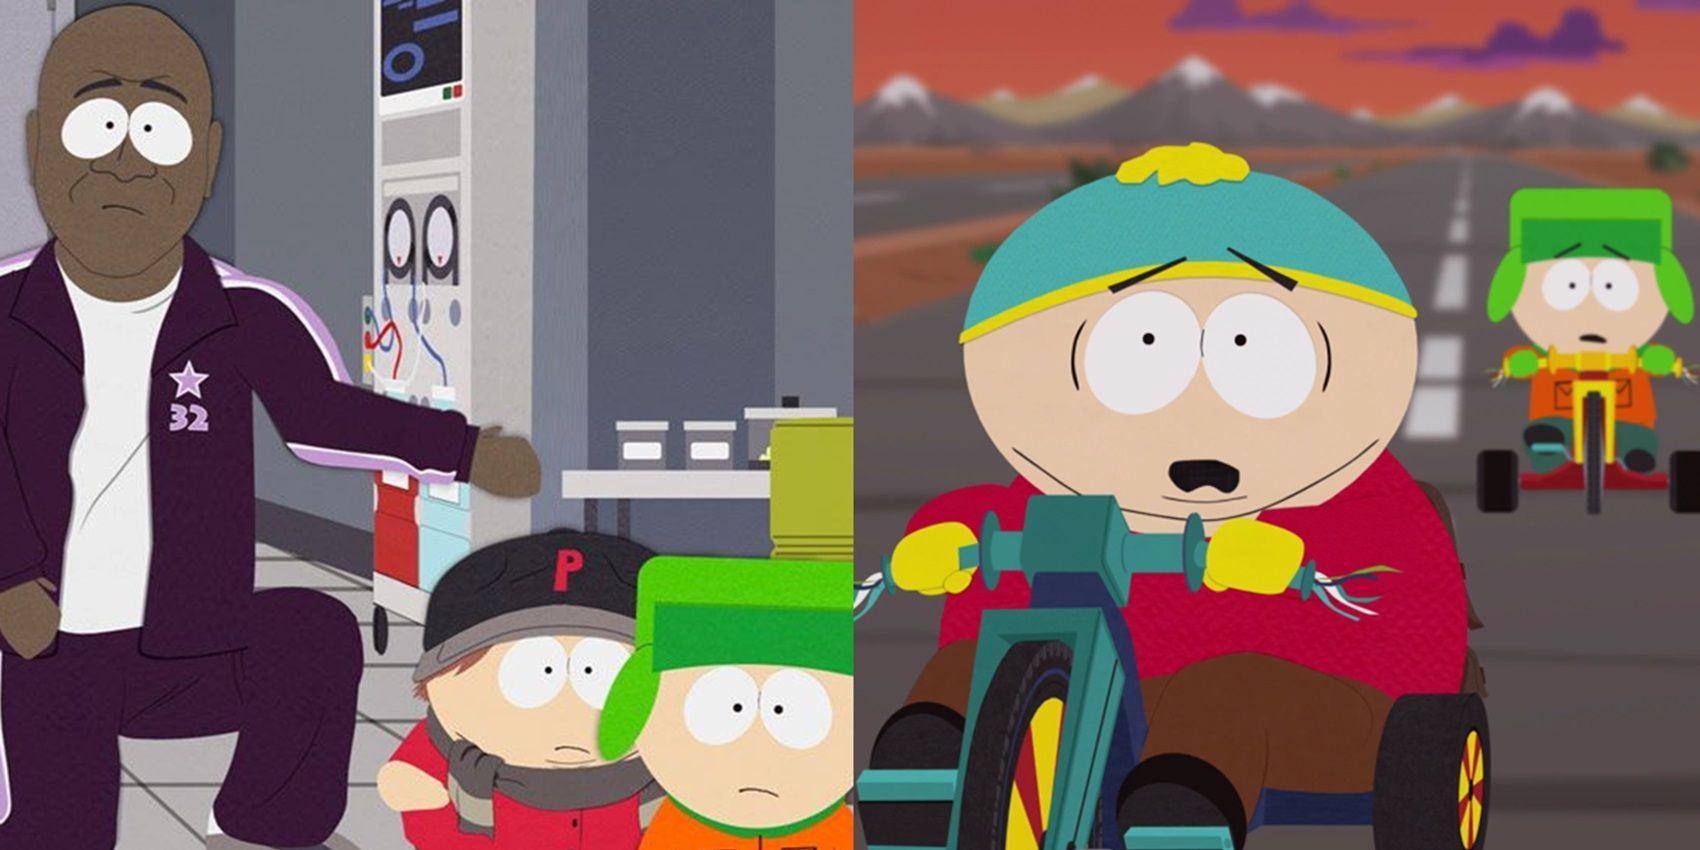 Cartman and Kyle in South Park